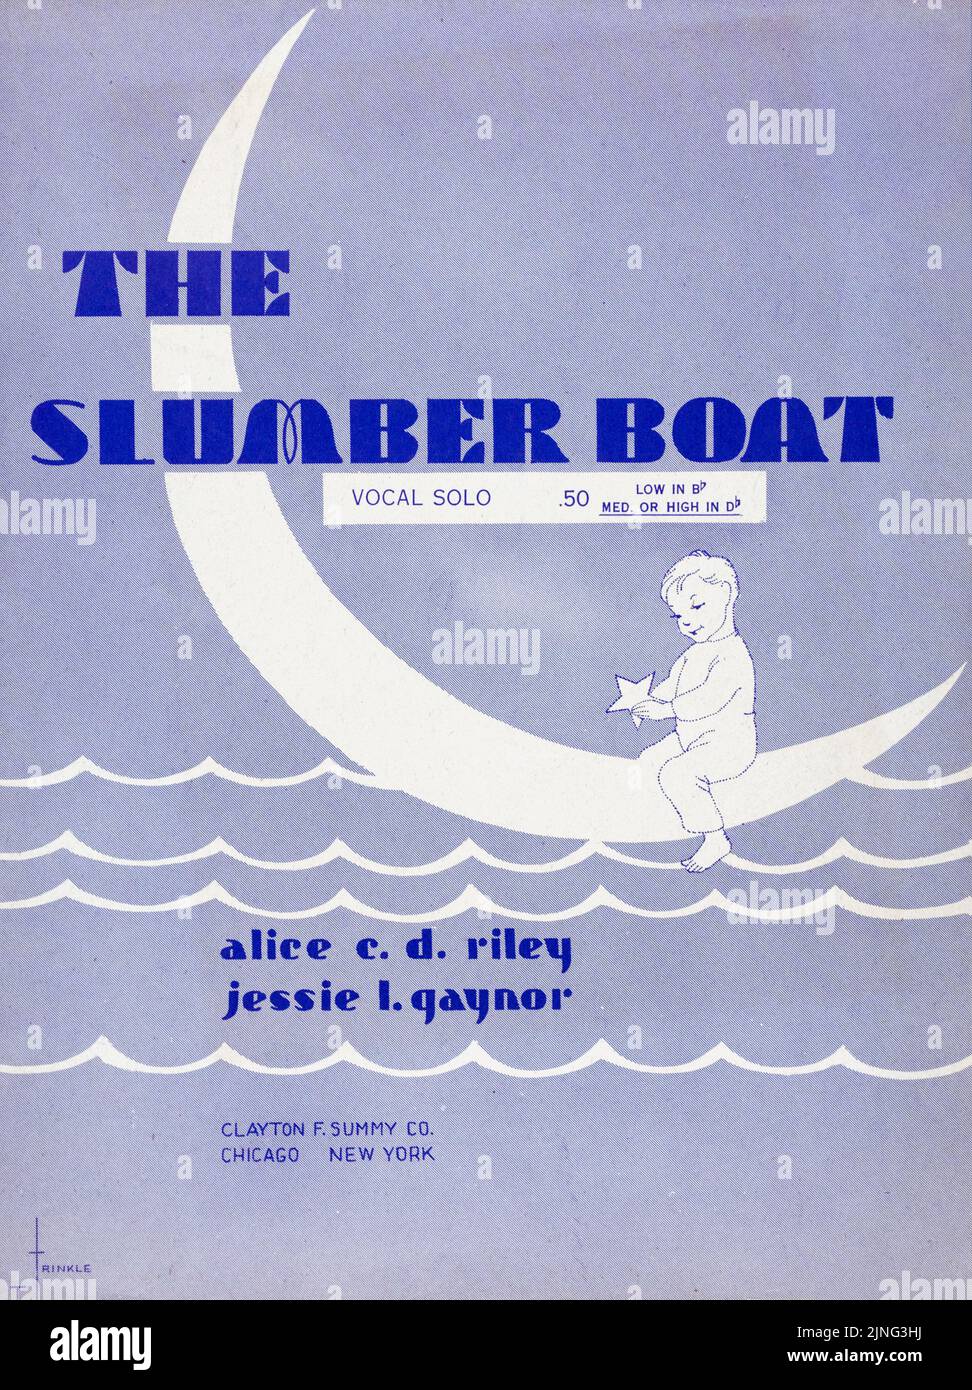 The slumber boat (1898) Vocal solo, by Alice C. D. Riley and Jessie L. Gaynor, Published by Clayton F. Summy Company. Sheet music cover. Illustration by Rinkle Stock Photo